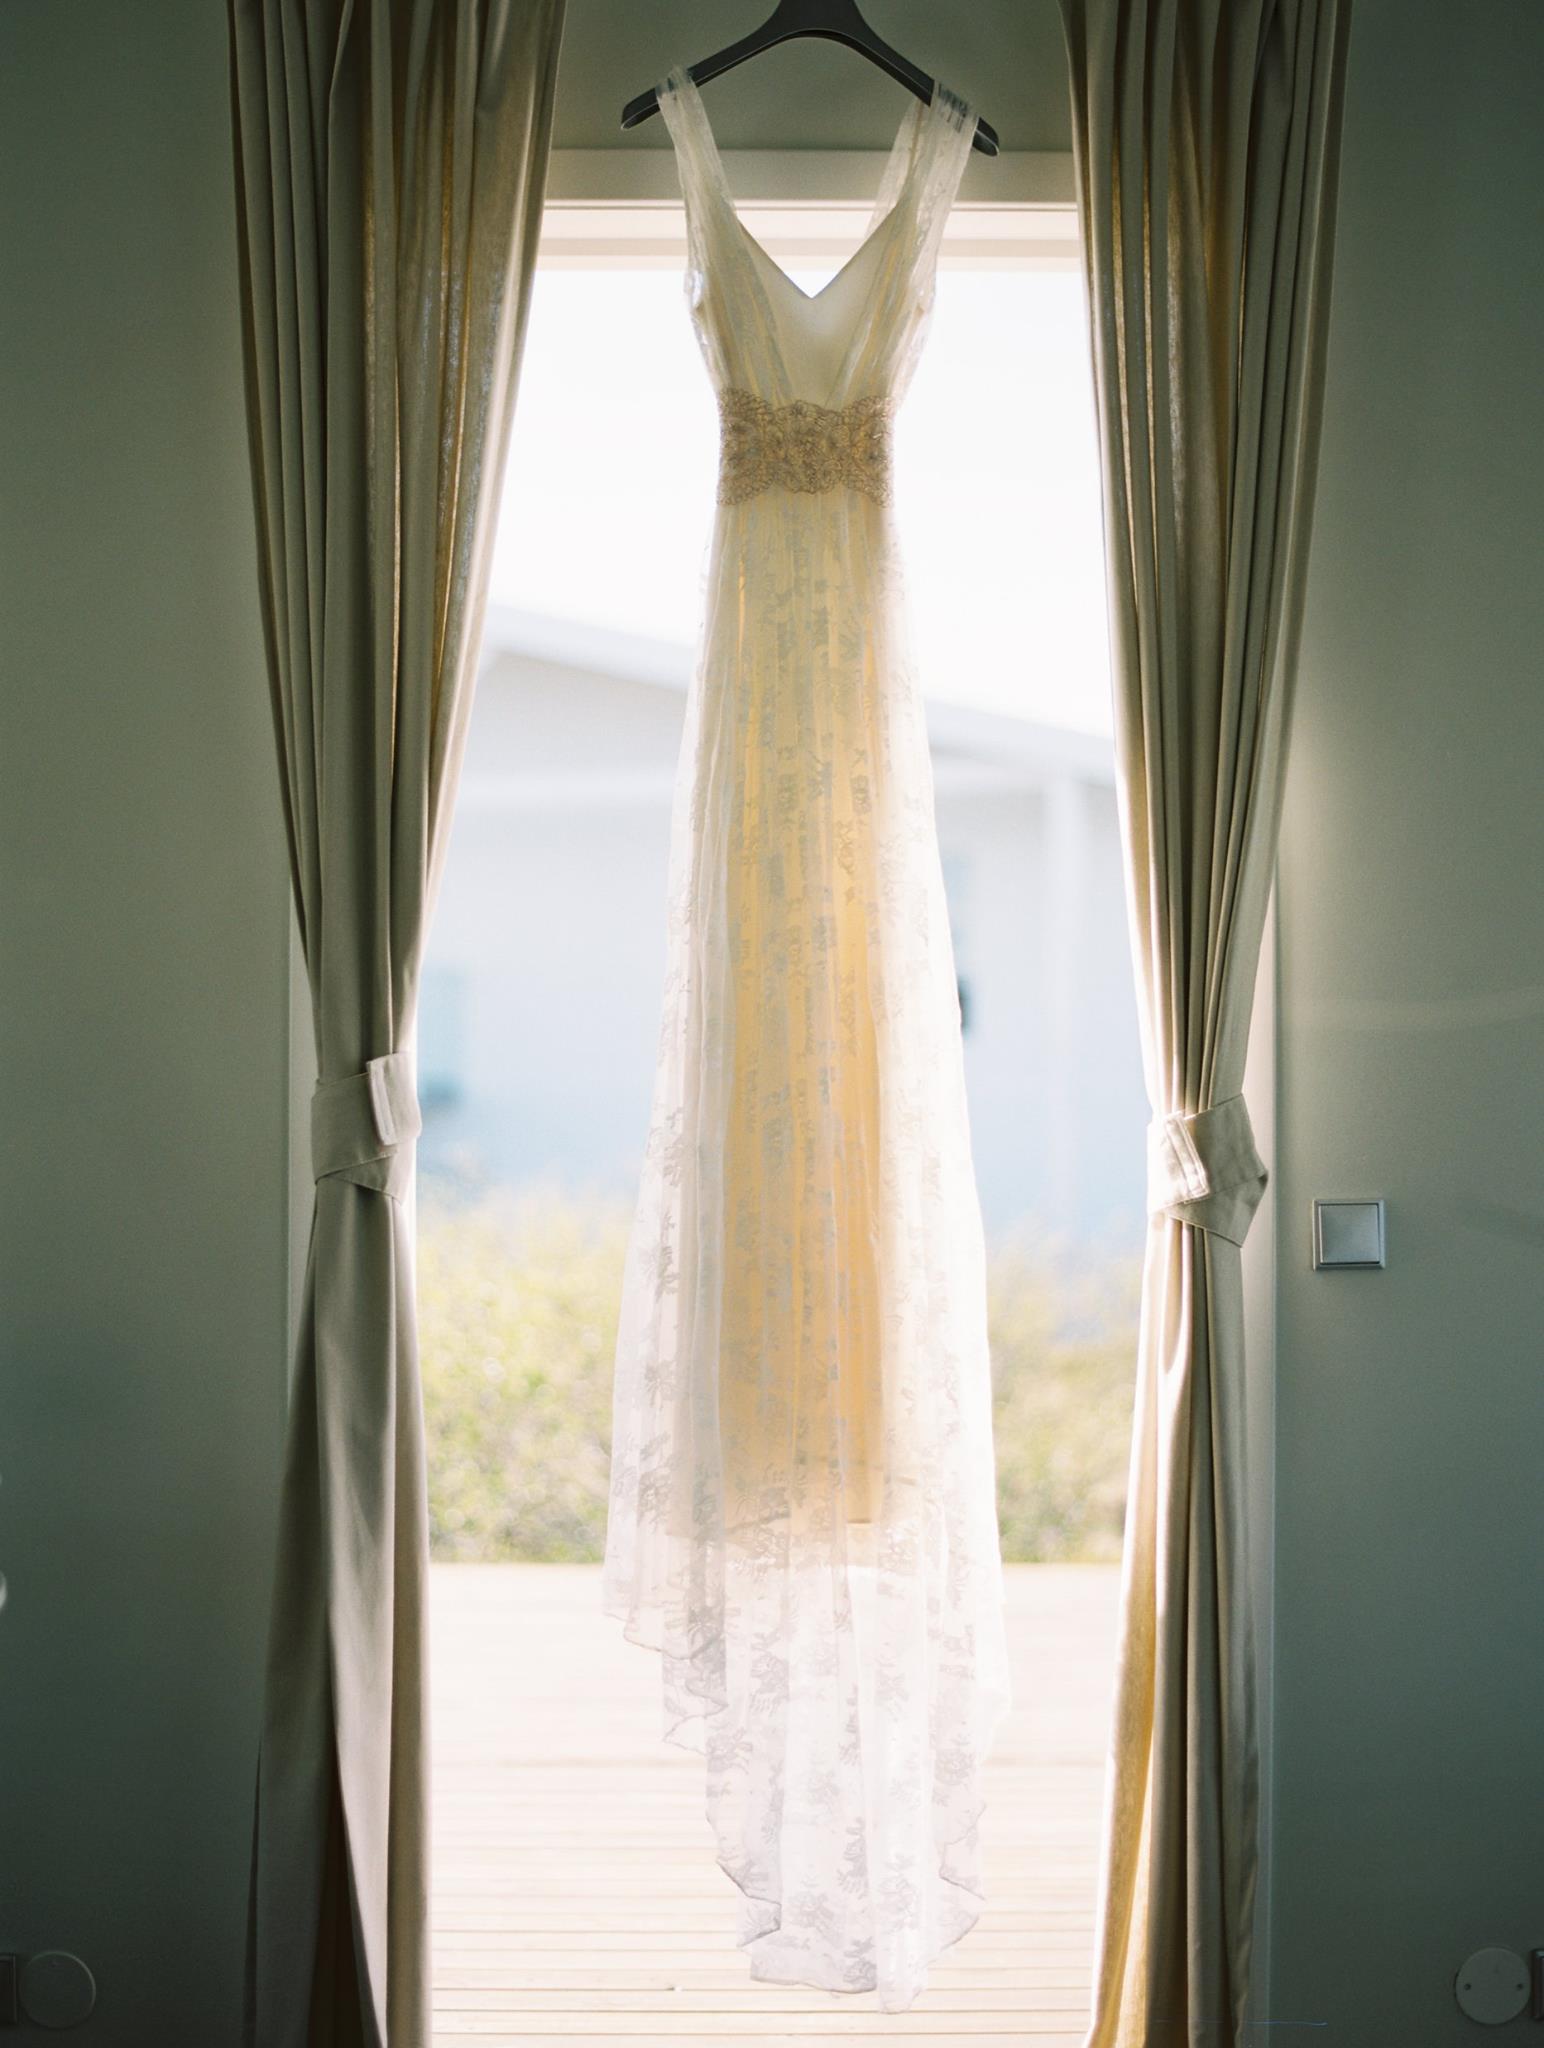  Lynzi | wedding gown by Charlie Brear available at Little White Dress Bridal Shop in Denver |&nbsp;   Brumley &amp; Wells &nbsp;Photography   